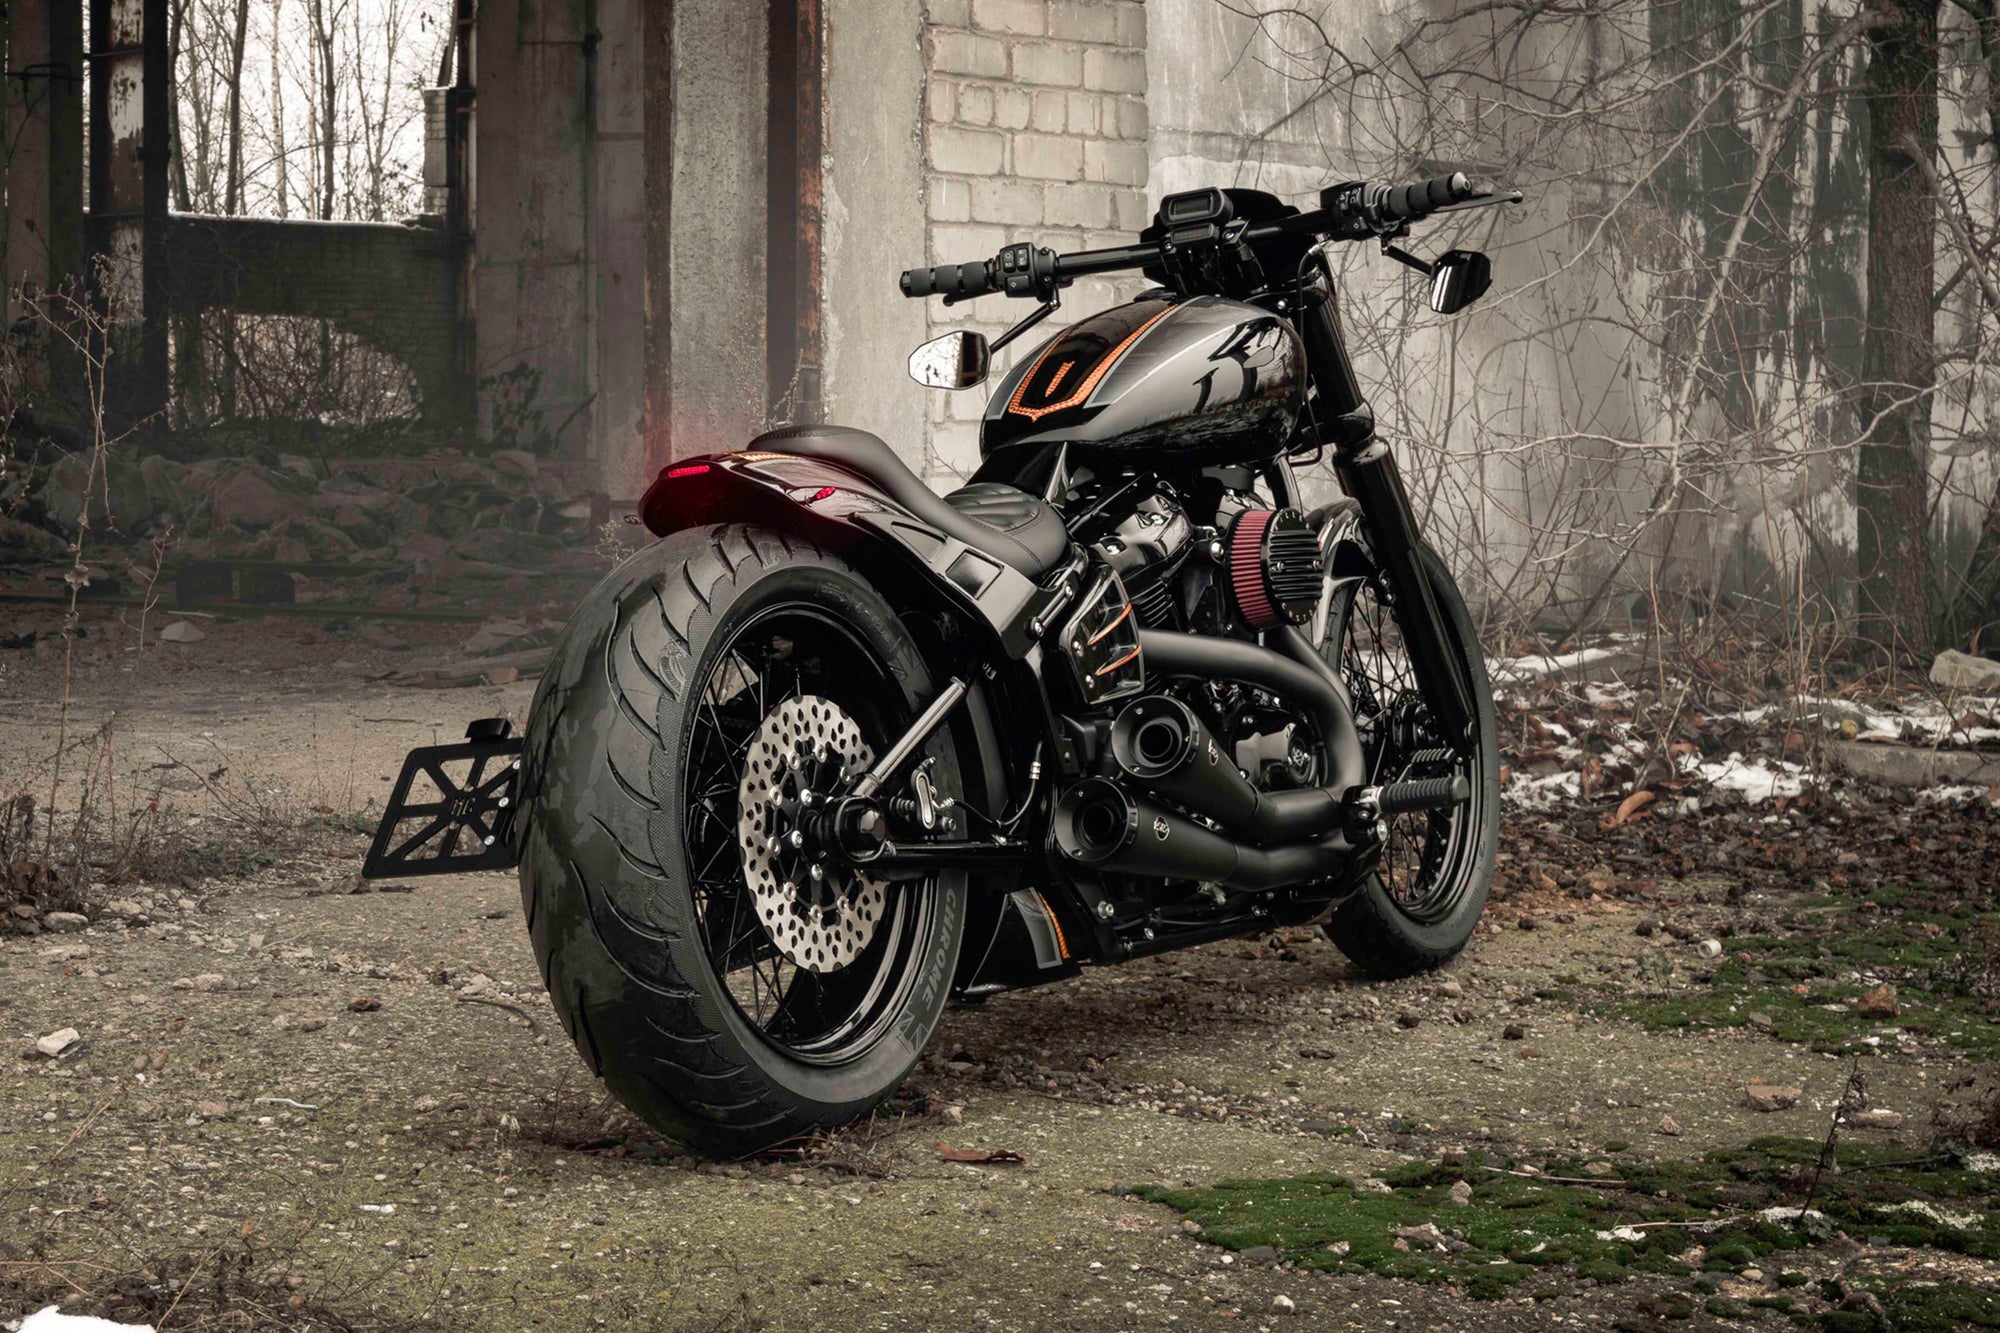 Harley Davidson motorcycle with Killer Custom parts from the rear outside in an abandoned environment